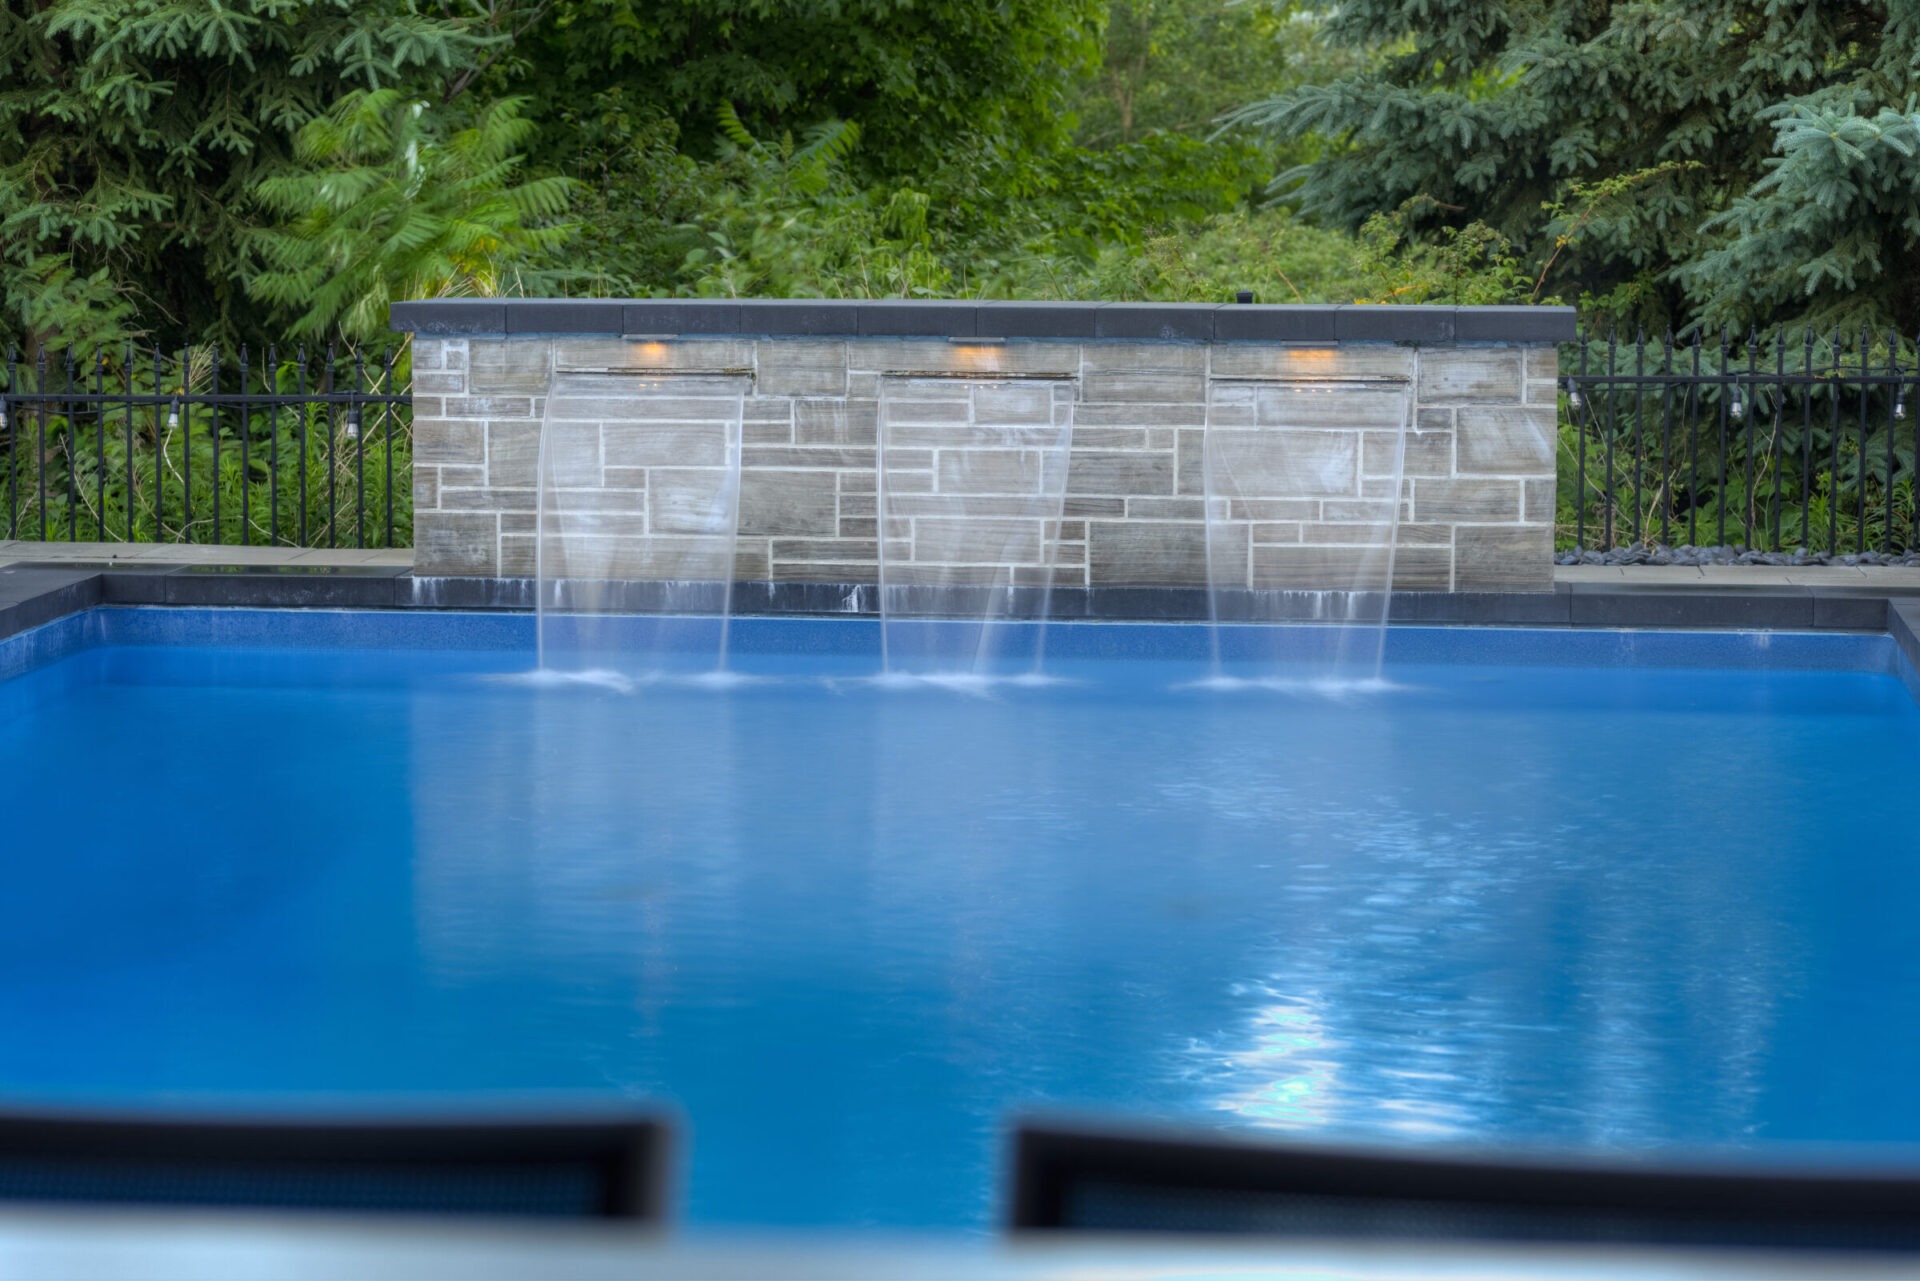 A serene swimming pool with tranquil water features pouring into the blue water. Surrounded by green foliage and a stone wall with integrated lights.